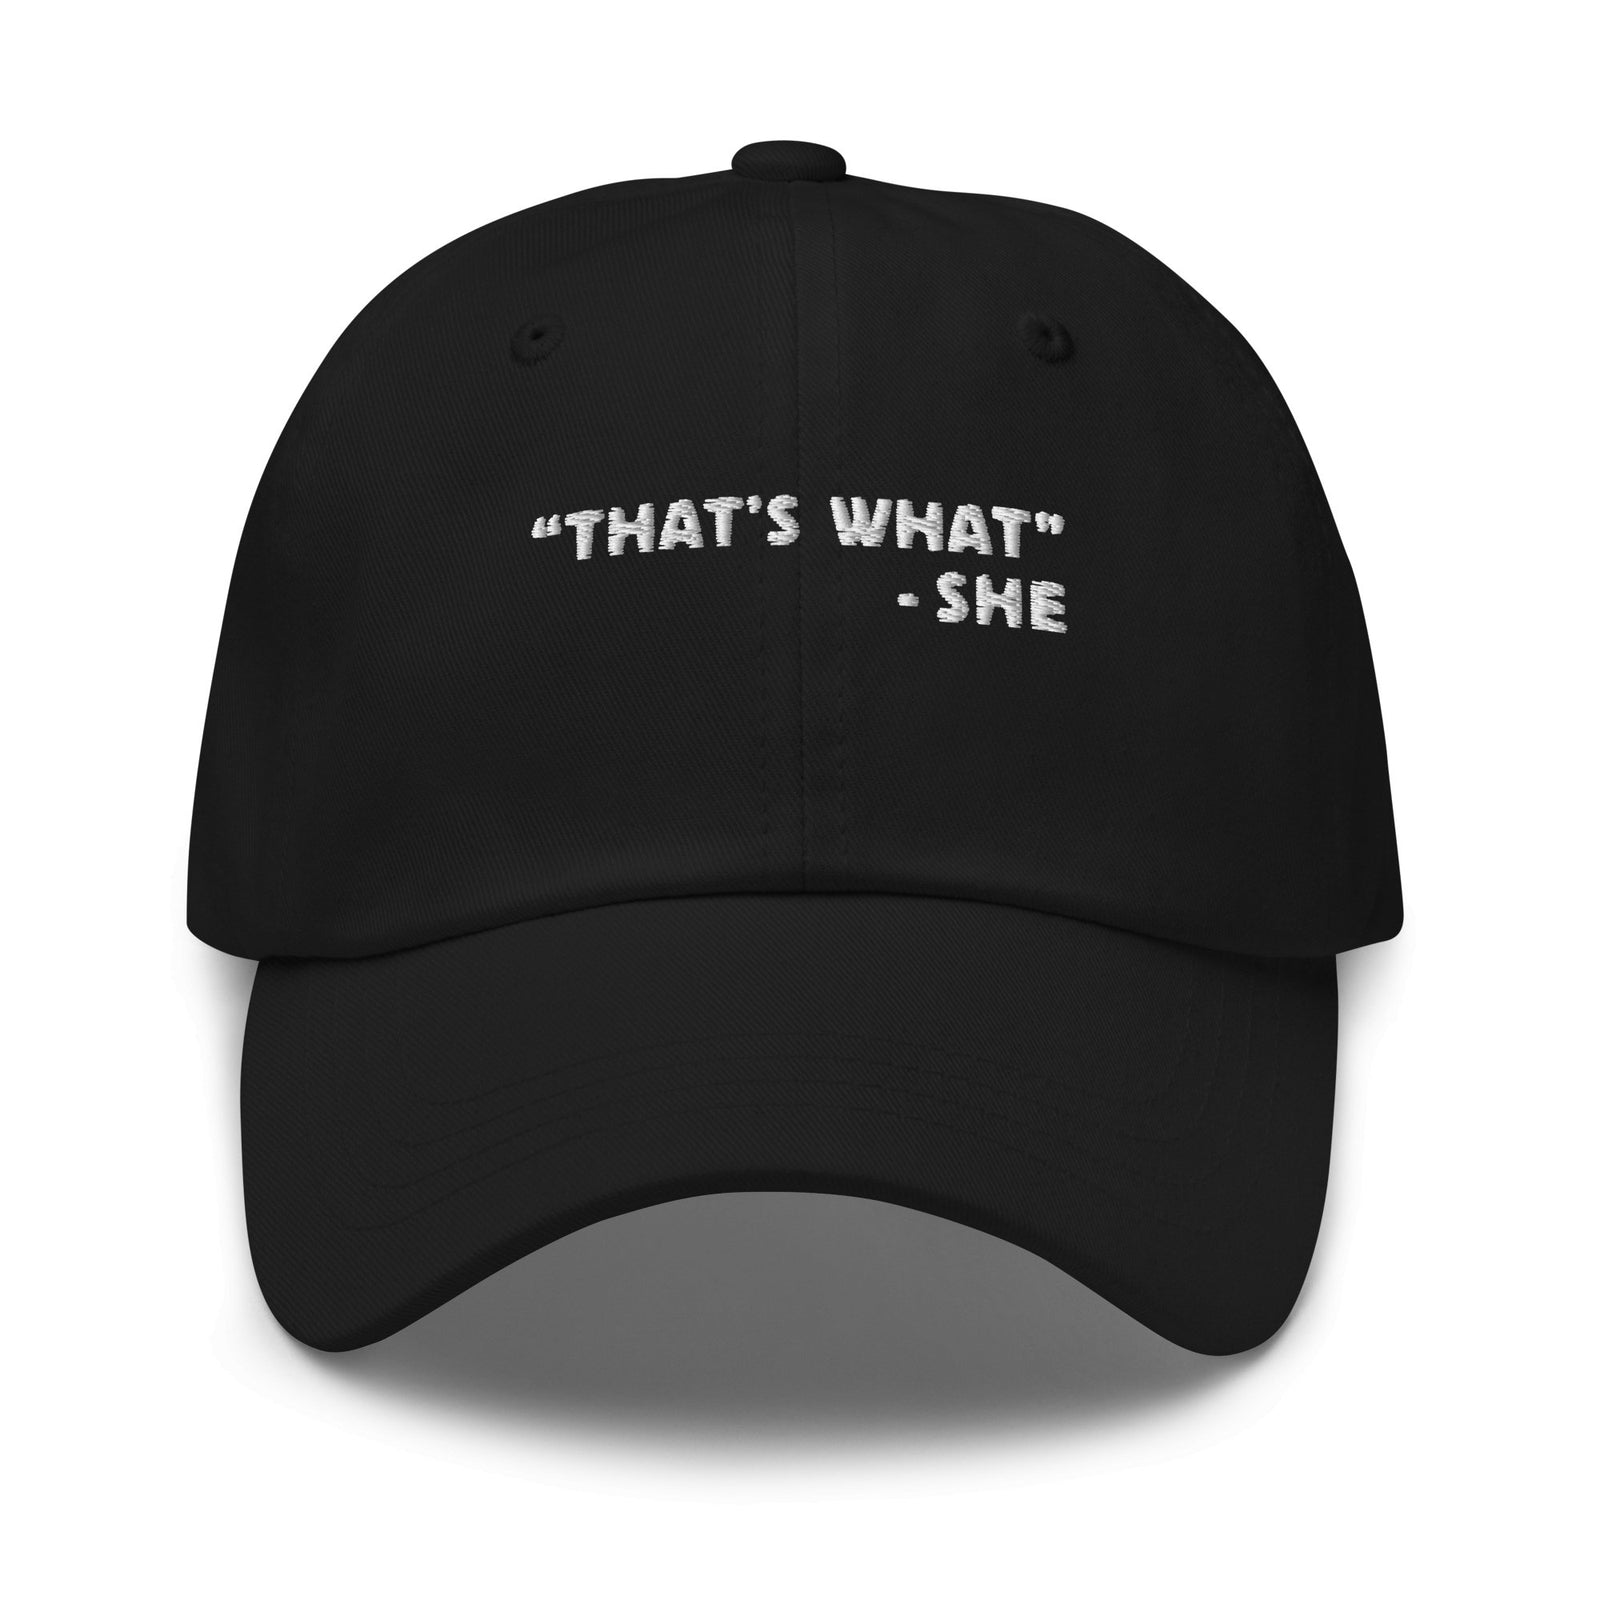 //cdn.shopify.com/s/files/1/0274/2488/2766/products/thats-what-she-said-dad-hat-264213_5000x.jpg?v=1652422639 5000w,
    //cdn.shopify.com/s/files/1/0274/2488/2766/products/thats-what-she-said-dad-hat-264213_4500x.jpg?v=1652422639 4500w,
    //cdn.shopify.com/s/files/1/0274/2488/2766/products/thats-what-she-said-dad-hat-264213_4000x.jpg?v=1652422639 4000w,
    //cdn.shopify.com/s/files/1/0274/2488/2766/products/thats-what-she-said-dad-hat-264213_3500x.jpg?v=1652422639 3500w,
    //cdn.shopify.com/s/files/1/0274/2488/2766/products/thats-what-she-said-dad-hat-264213_3000x.jpg?v=1652422639 3000w,
    //cdn.shopify.com/s/files/1/0274/2488/2766/products/thats-what-she-said-dad-hat-264213_2500x.jpg?v=1652422639 2500w,
    //cdn.shopify.com/s/files/1/0274/2488/2766/products/thats-what-she-said-dad-hat-264213_2000x.jpg?v=1652422639 2000w,
    //cdn.shopify.com/s/files/1/0274/2488/2766/products/thats-what-she-said-dad-hat-264213_1800x.jpg?v=1652422639 1800w,
    //cdn.shopify.com/s/files/1/0274/2488/2766/products/thats-what-she-said-dad-hat-264213_1600x.jpg?v=1652422639 1600w,
    //cdn.shopify.com/s/files/1/0274/2488/2766/products/thats-what-she-said-dad-hat-264213_1400x.jpg?v=1652422639 1400w,
    //cdn.shopify.com/s/files/1/0274/2488/2766/products/thats-what-she-said-dad-hat-264213_1200x.jpg?v=1652422639 1200w,
    //cdn.shopify.com/s/files/1/0274/2488/2766/products/thats-what-she-said-dad-hat-264213_1000x.jpg?v=1652422639 1000w,
    //cdn.shopify.com/s/files/1/0274/2488/2766/products/thats-what-she-said-dad-hat-264213_800x.jpg?v=1652422639 800w,
    //cdn.shopify.com/s/files/1/0274/2488/2766/products/thats-what-she-said-dad-hat-264213_600x.jpg?v=1652422639 600w,
    //cdn.shopify.com/s/files/1/0274/2488/2766/products/thats-what-she-said-dad-hat-264213_400x.jpg?v=1652422639 400w,
    //cdn.shopify.com/s/files/1/0274/2488/2766/products/thats-what-she-said-dad-hat-264213_200x.jpg?v=1652422639 200w